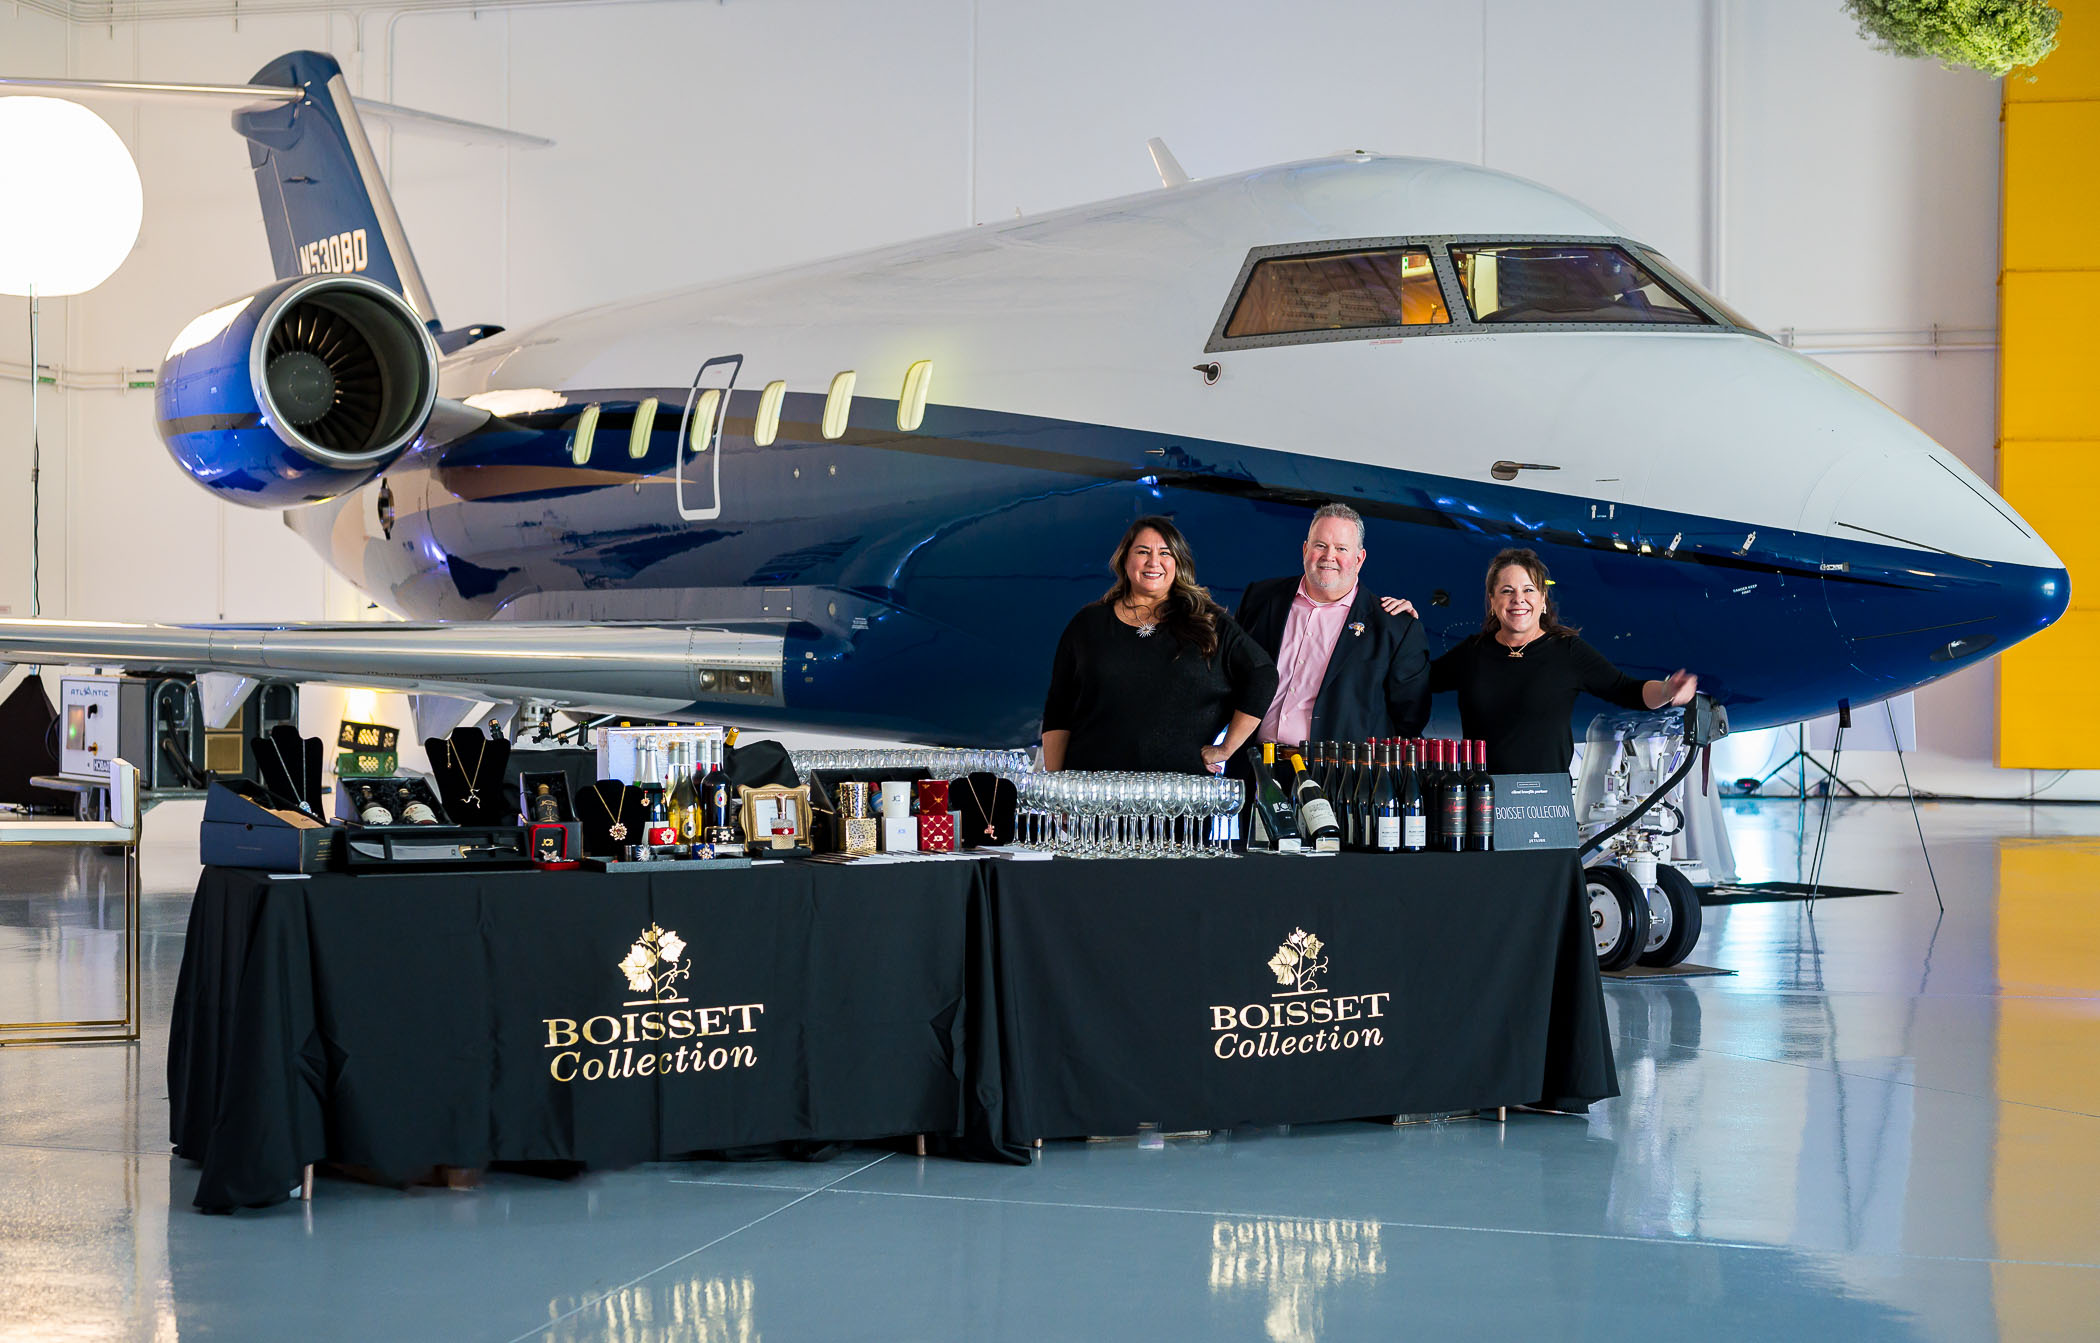 Boisset Collection display table in front of private jet